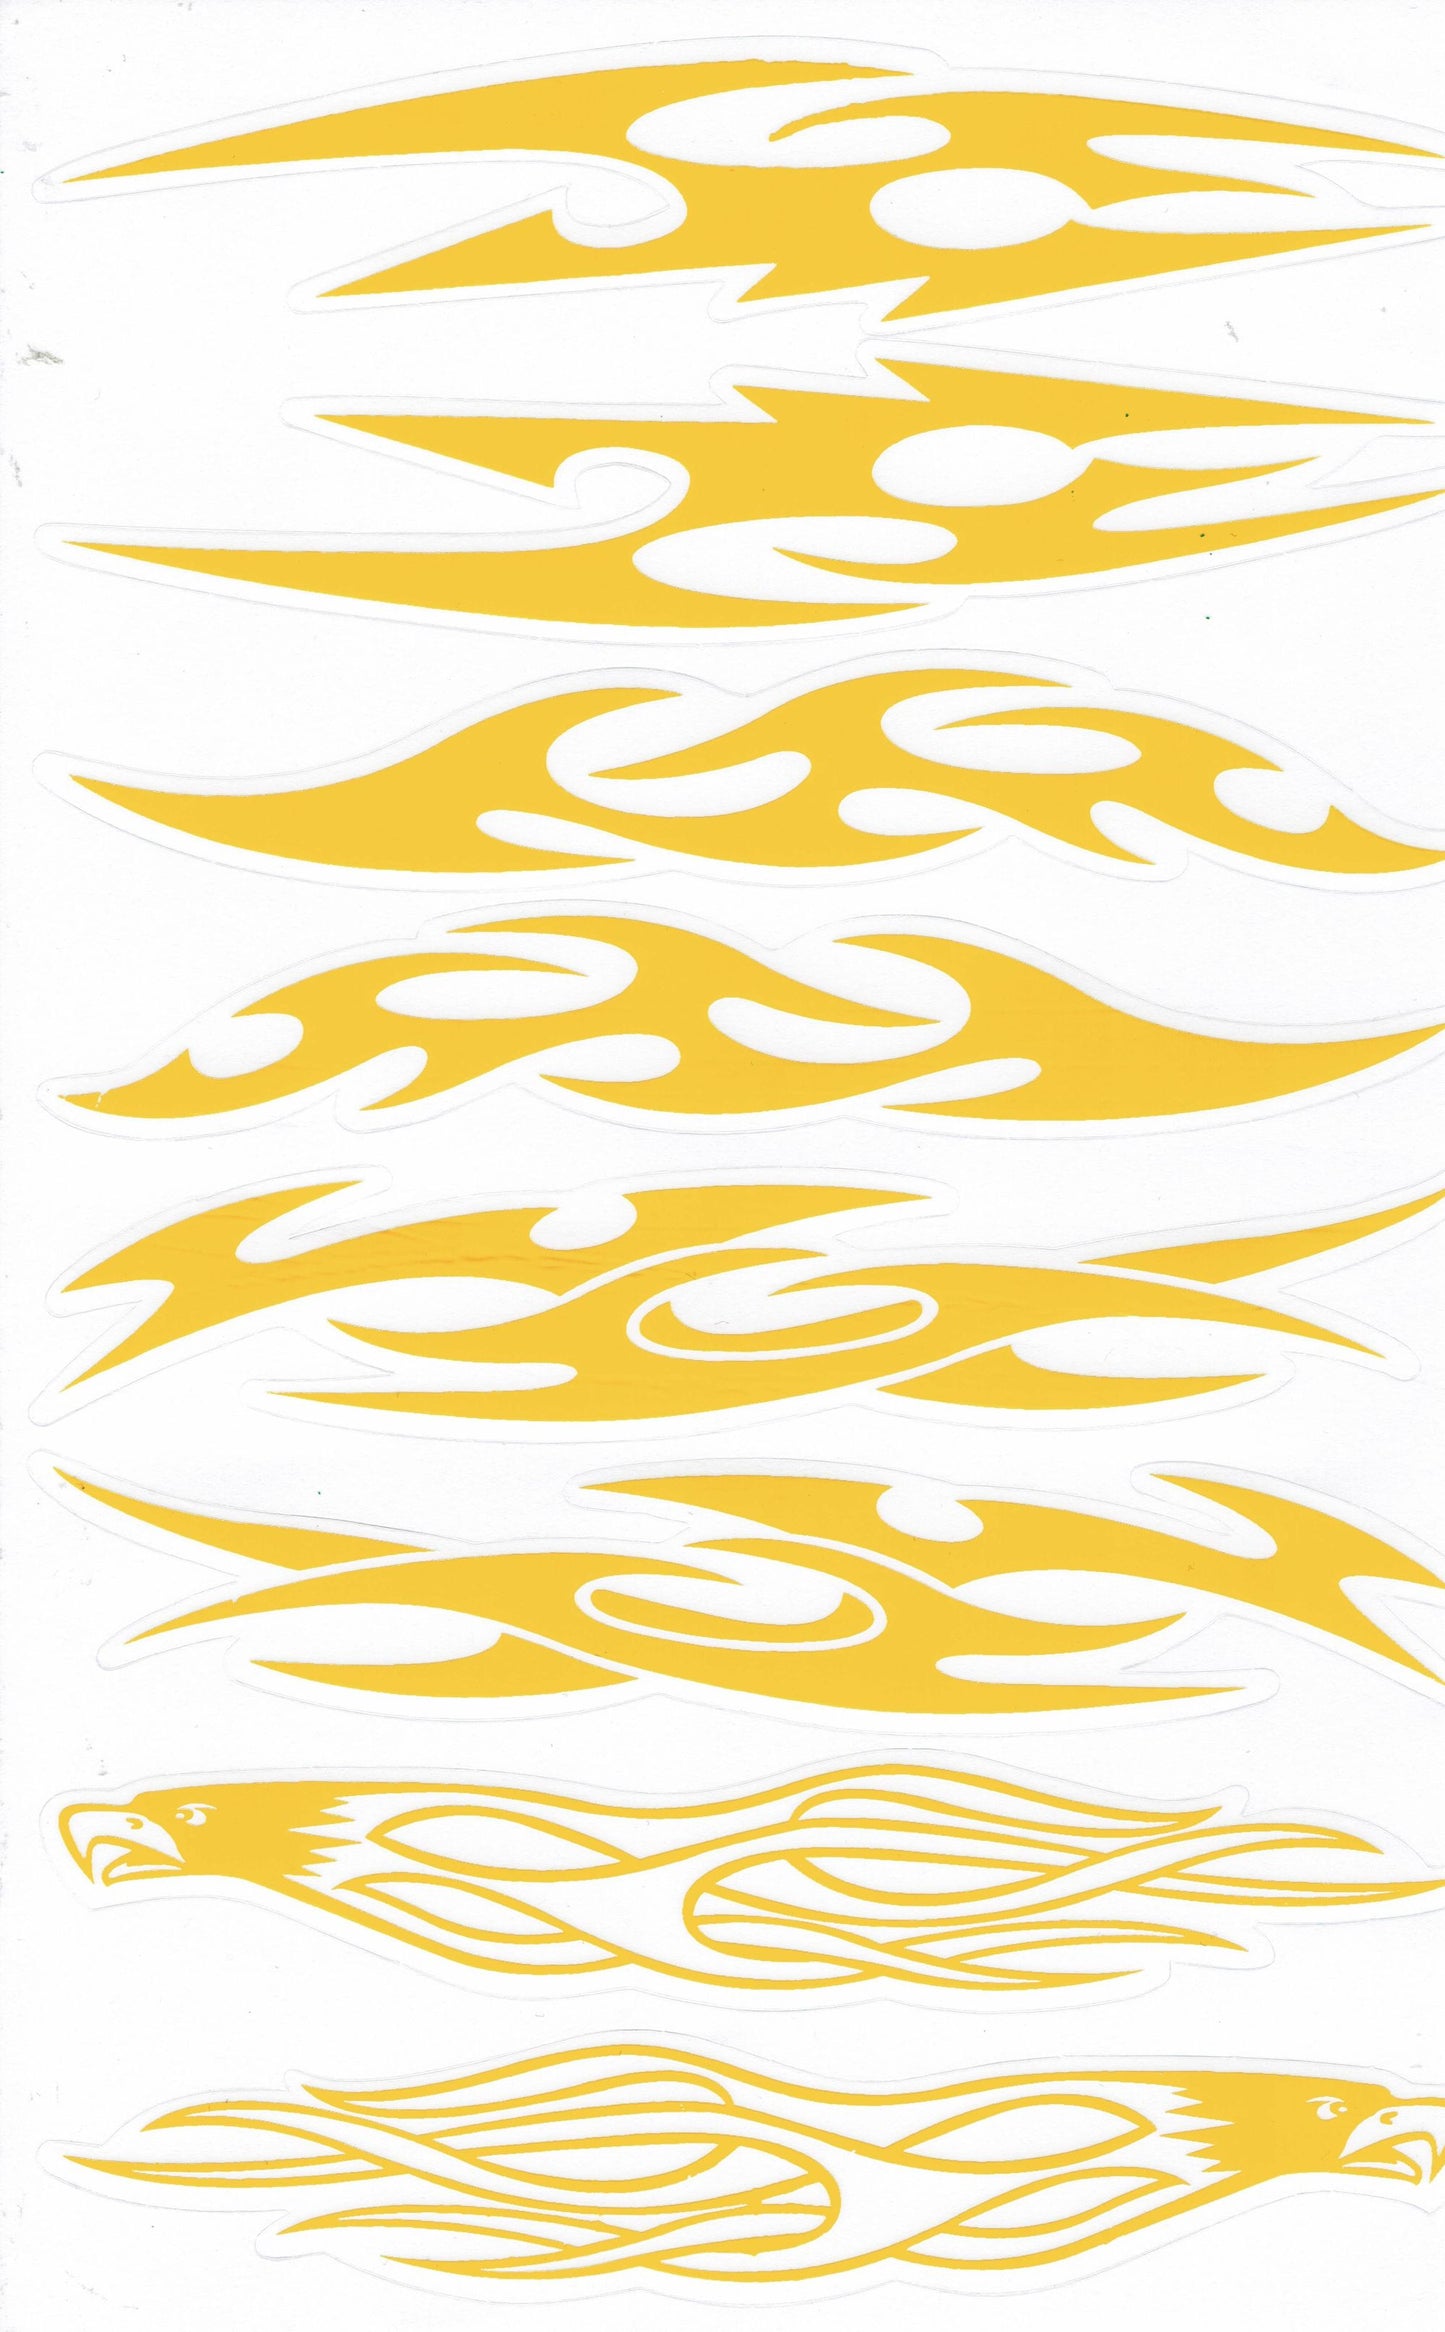 Flames fire yellow sticker motorcycle scooter skateboard car tuning model construction self-adhesive 529